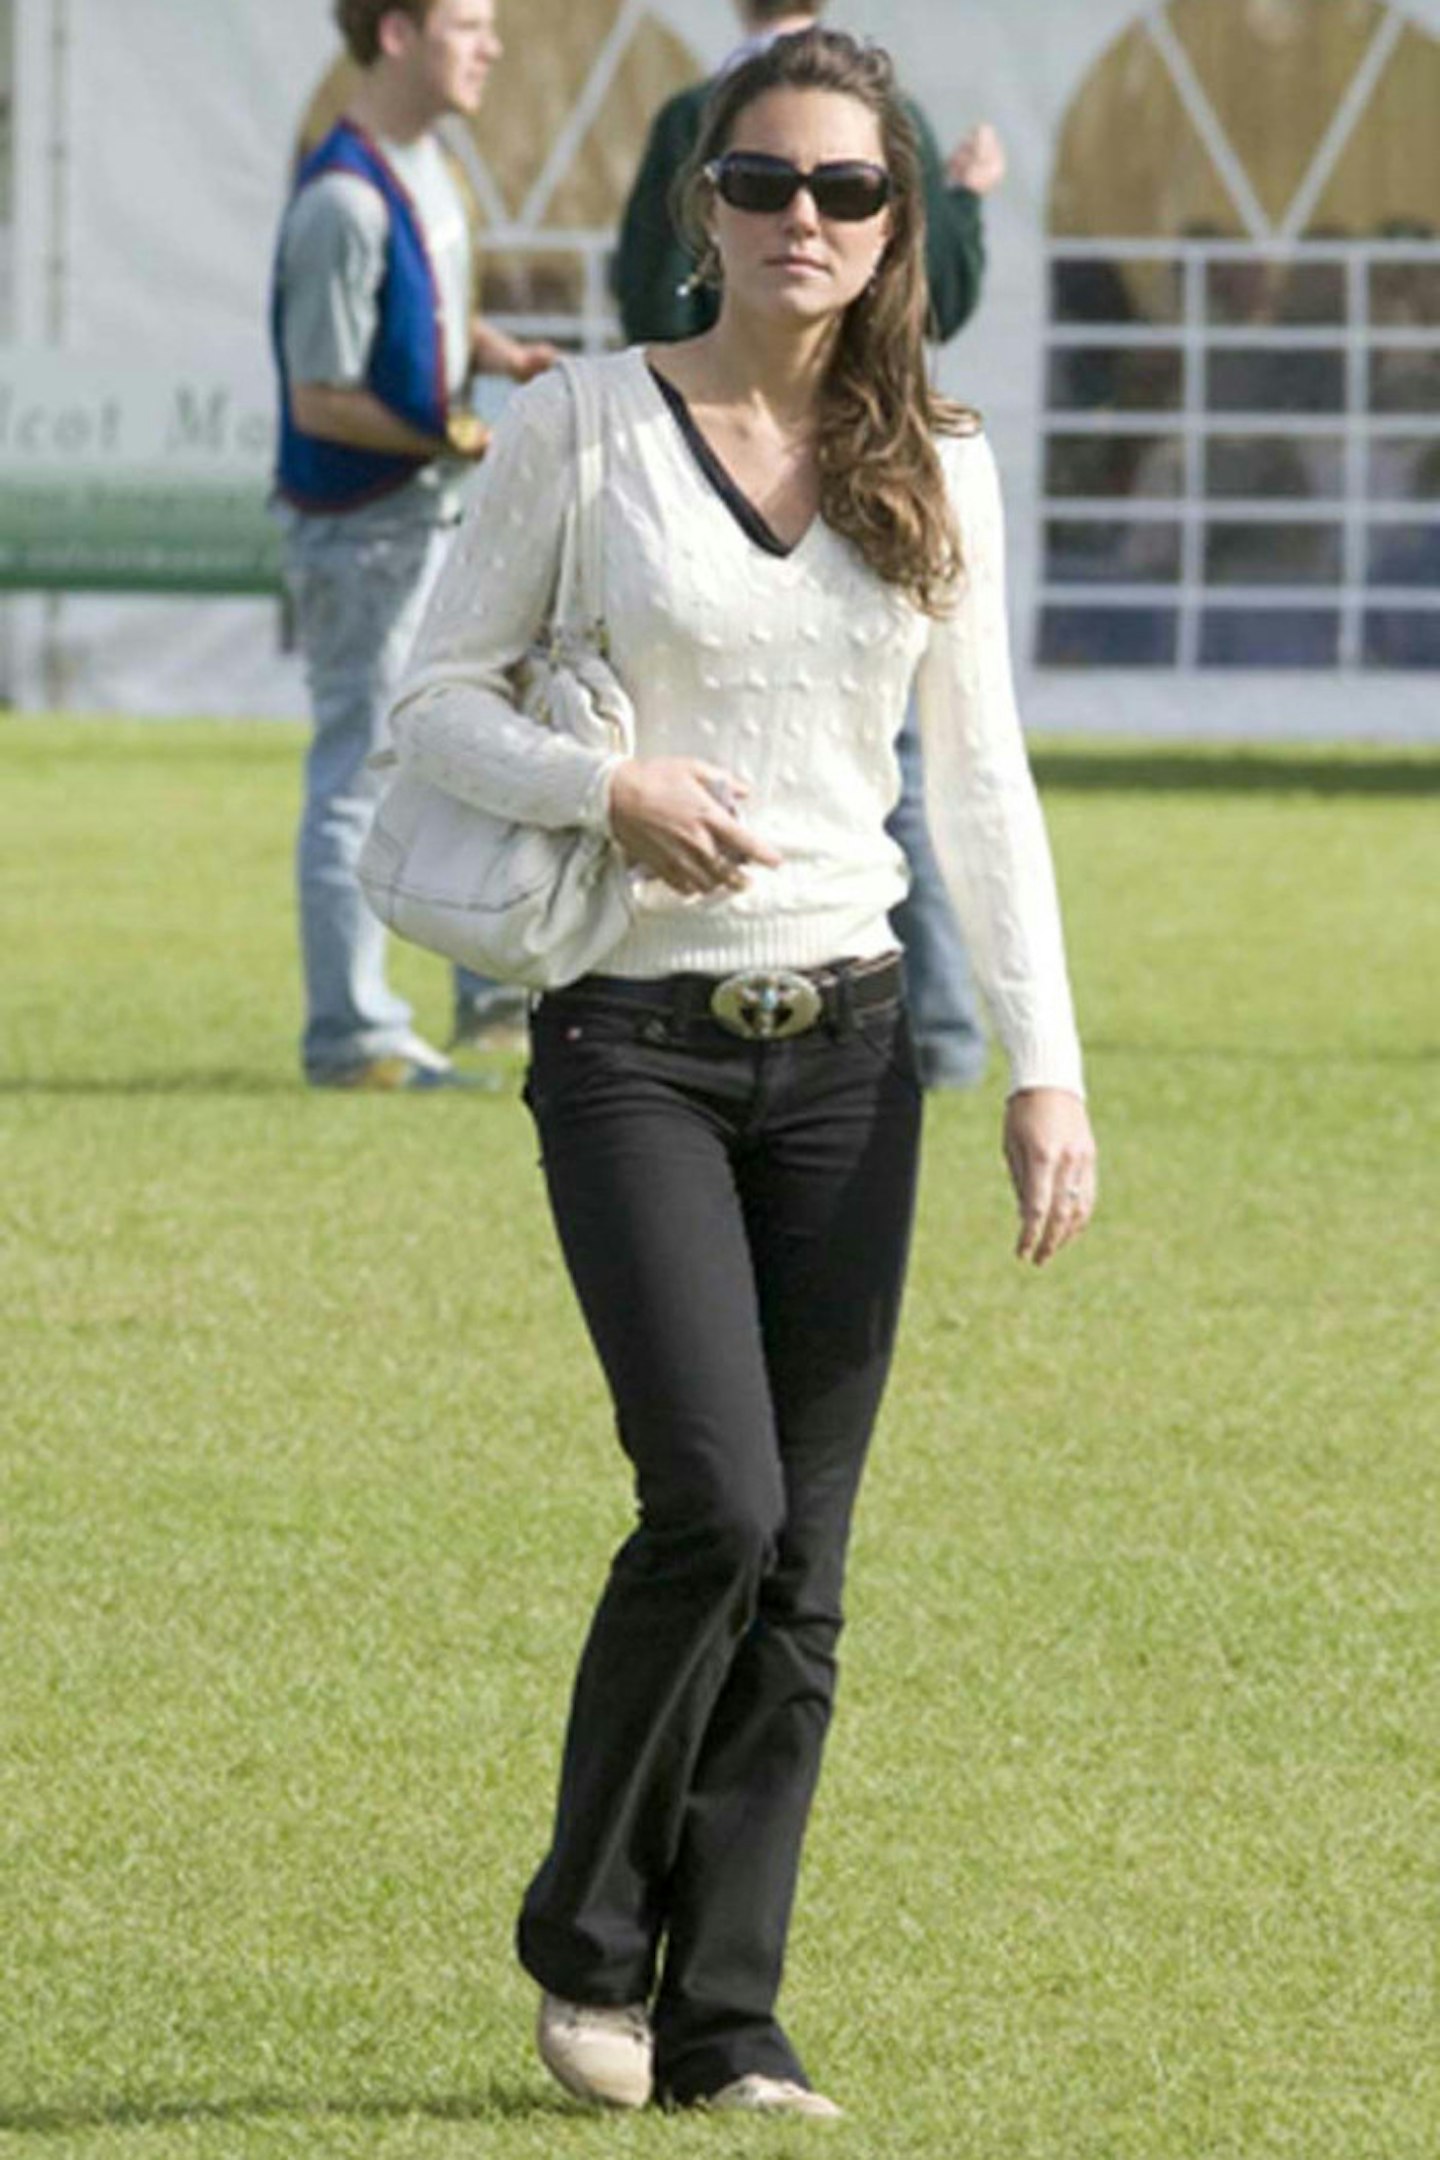 Kate Middleton at the 'Tusk' Charity Polo Match at the Beaufort Polo Club, Westonbirt, Gloucestershire, 22 June 2008